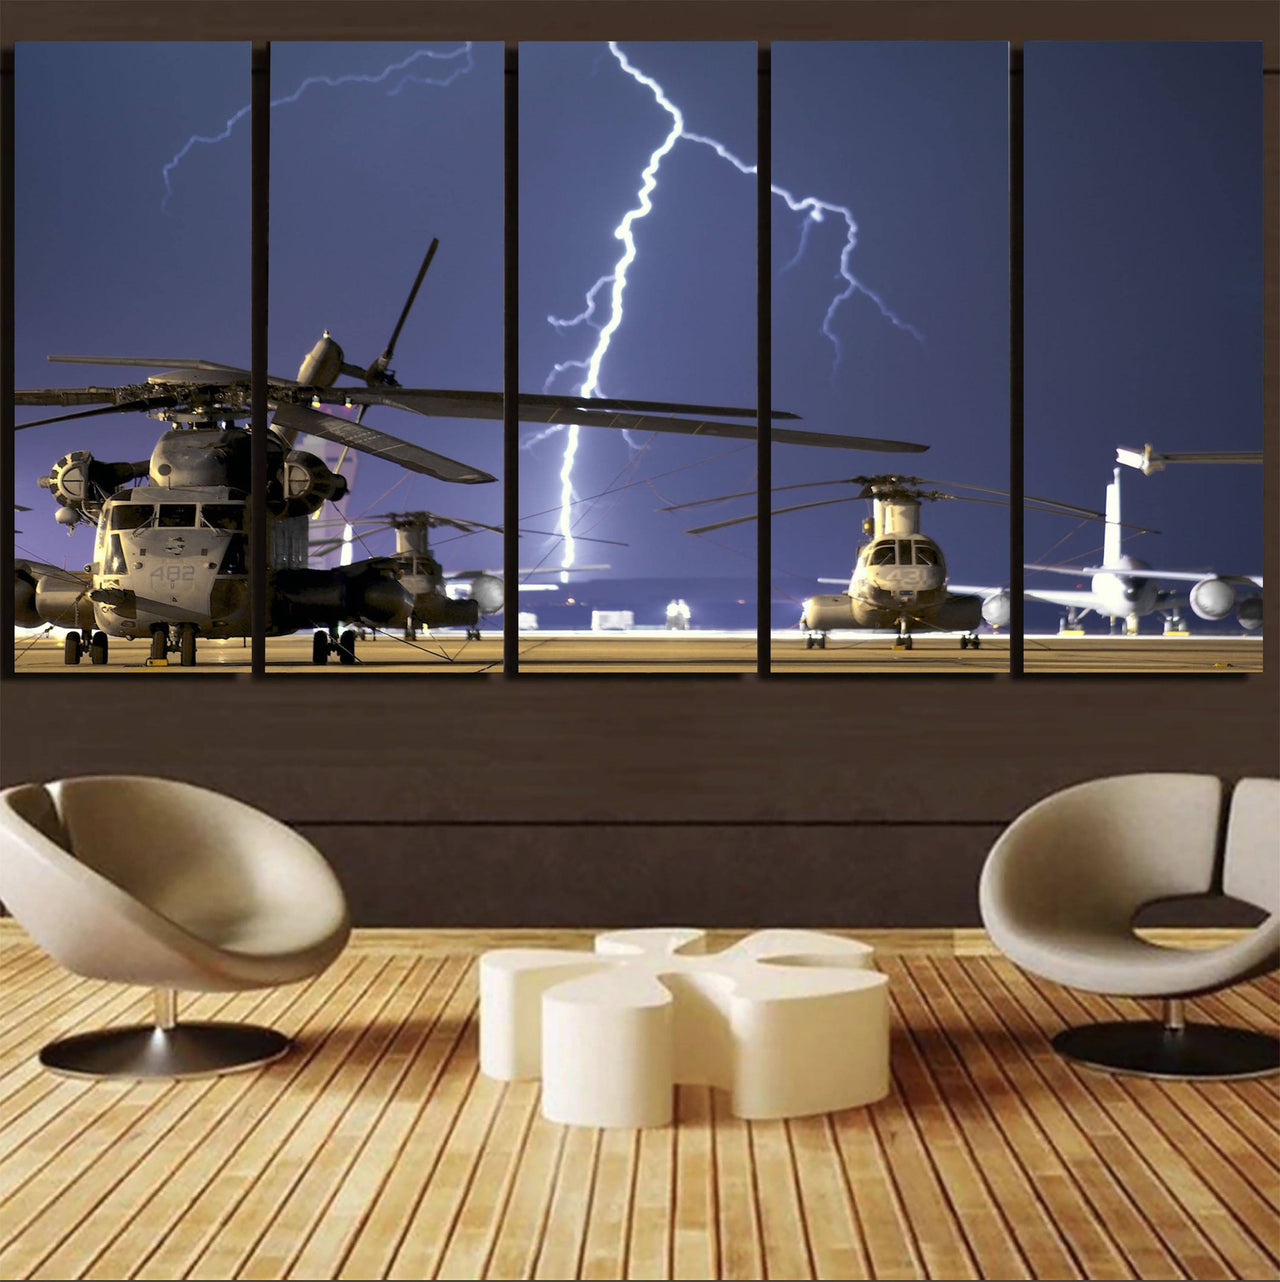 Helicopter & Lighting Strike Printed Canvas Prints (5 Pieces) Aviation Shop 